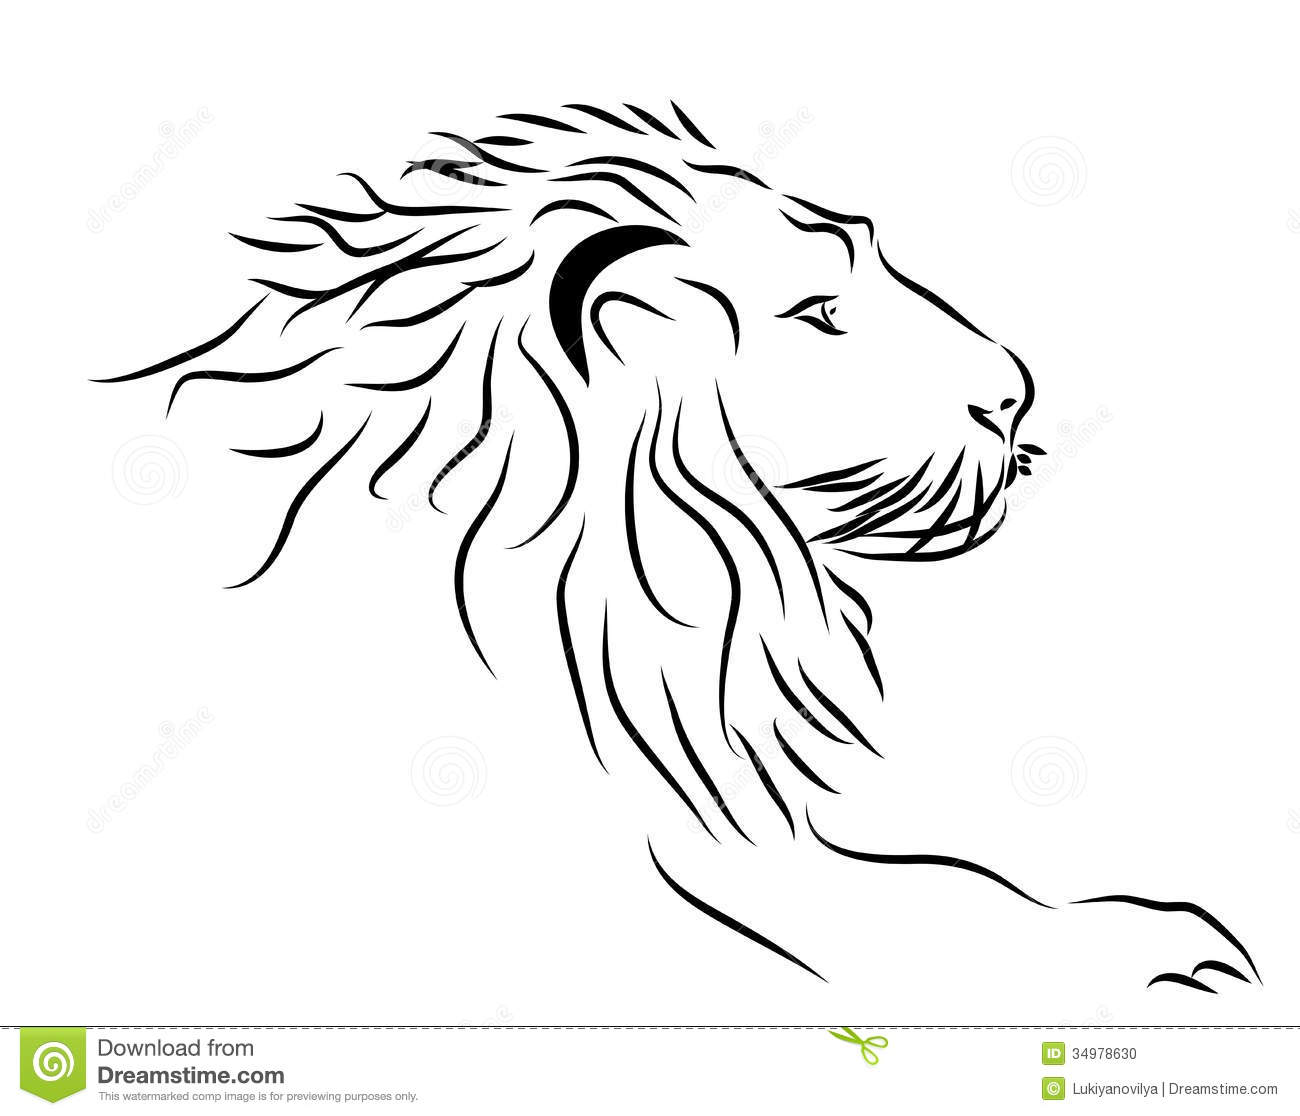 Lion Head Logo In Black And White  Stock Photo   Image  34978630